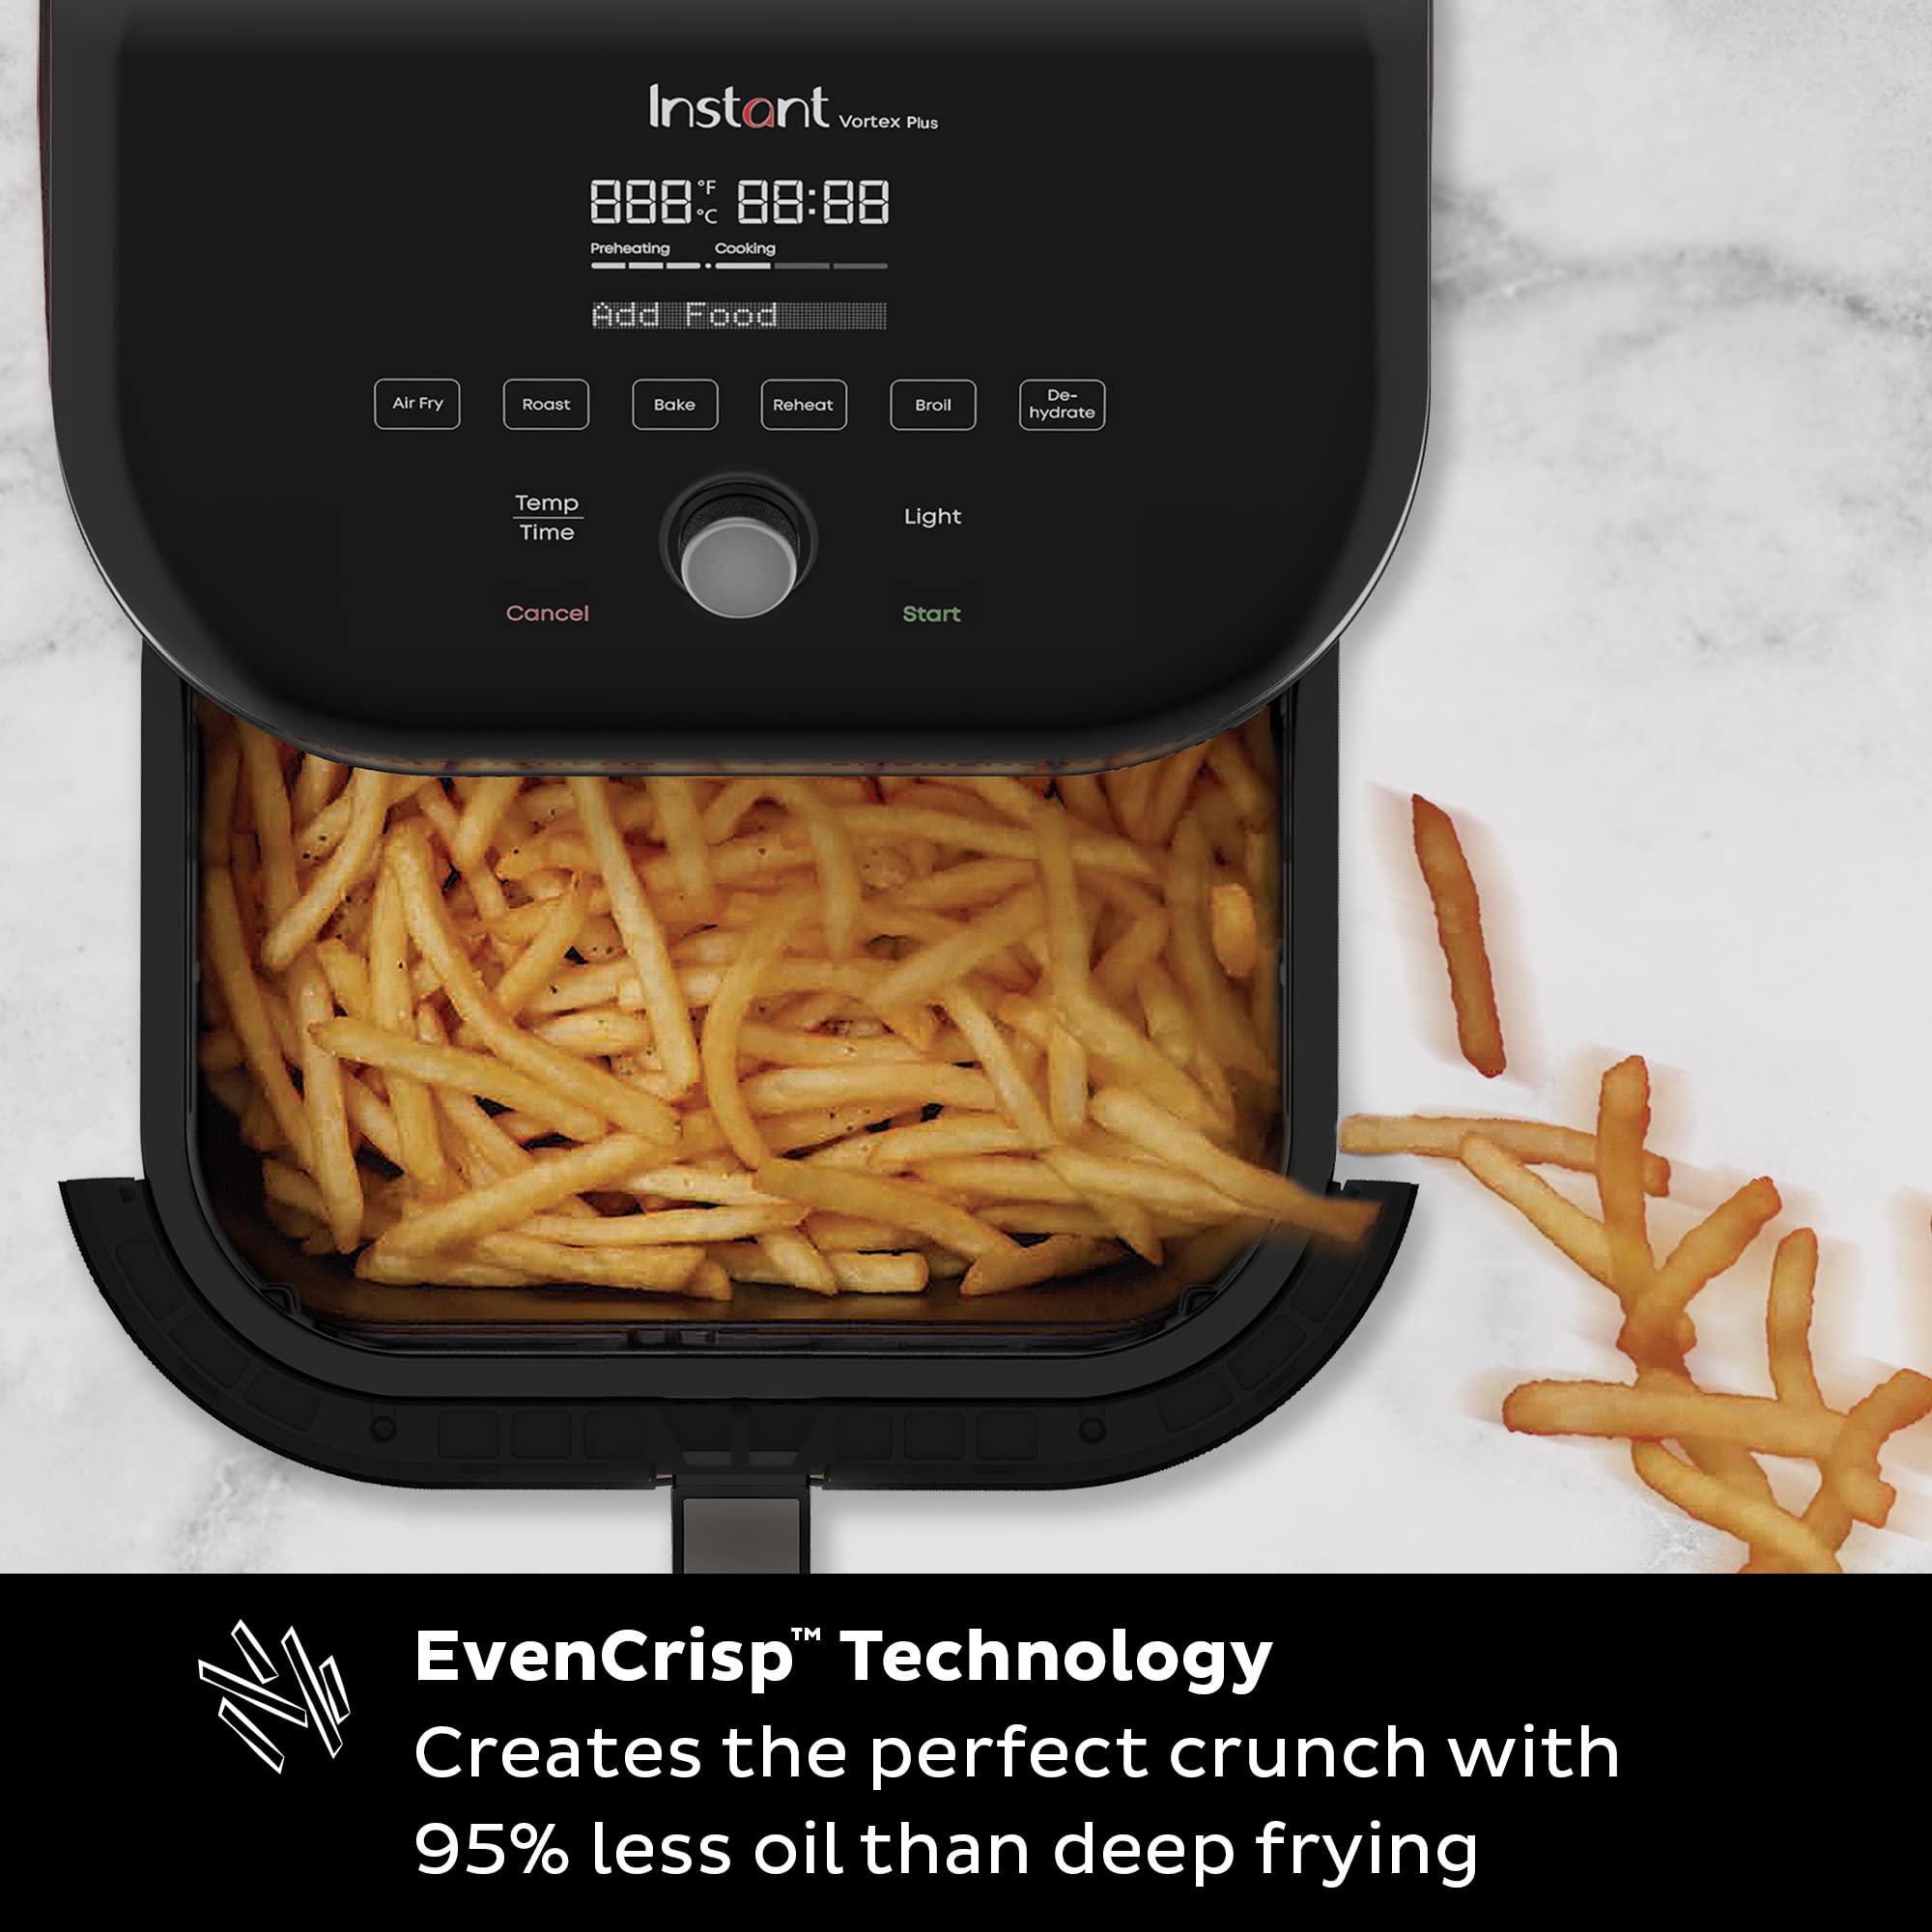 Instant Vortex Plus 6-Quart Air Fryer Oven, From the Makers of Instant Pot with Odor Erase Technology, ClearCook Cooking Window, App with over 100 Recipes, Single Basket, Stainless Steel